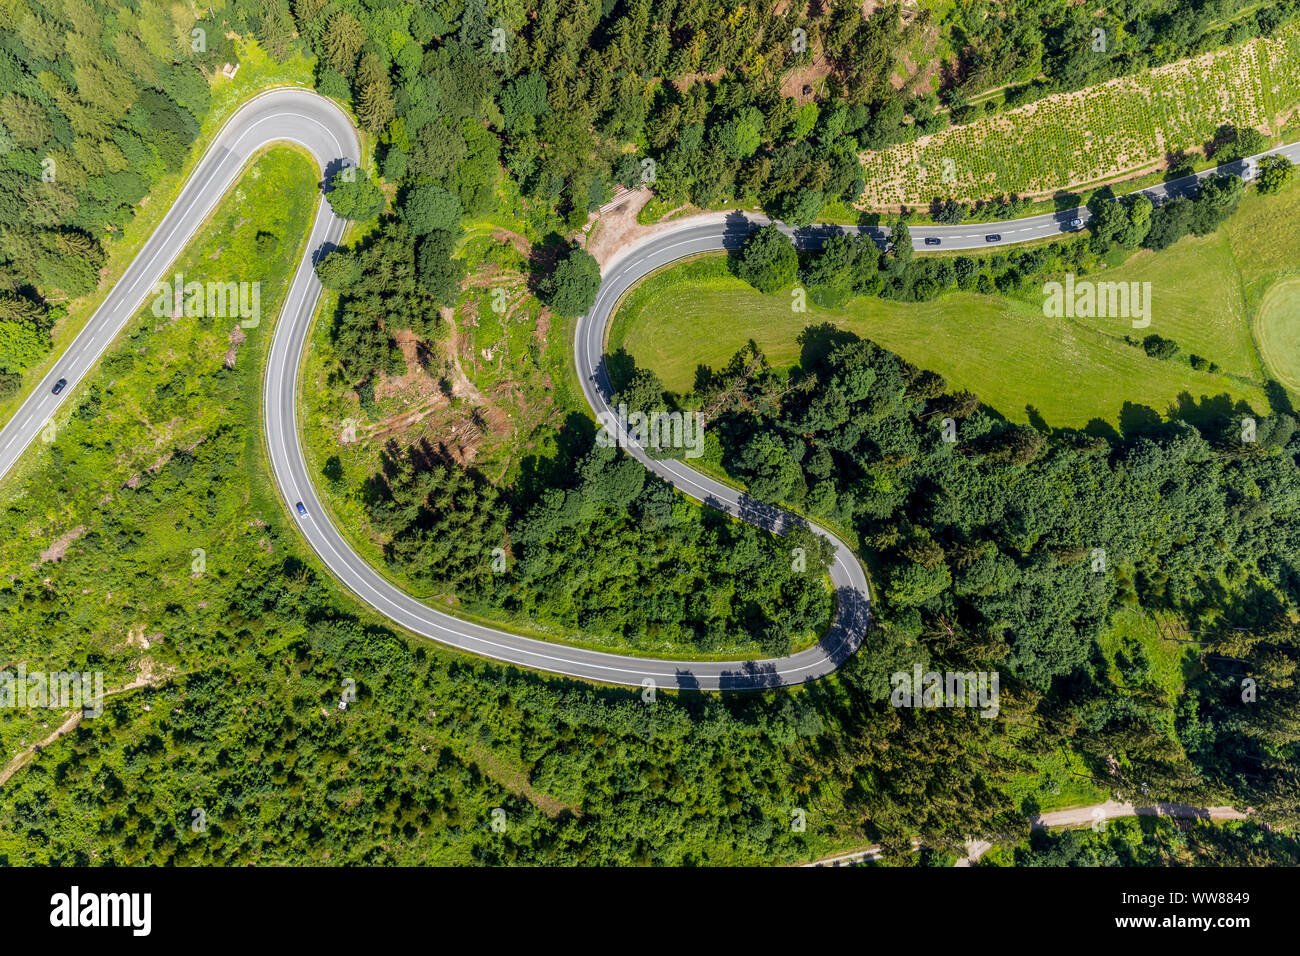 Hairpin turns, Am Bilstein, Highway L870, Motorcycle track with dangerous curves, Brilon, Sauerland, North Rhine-Westphalia, Germany Stock Photo